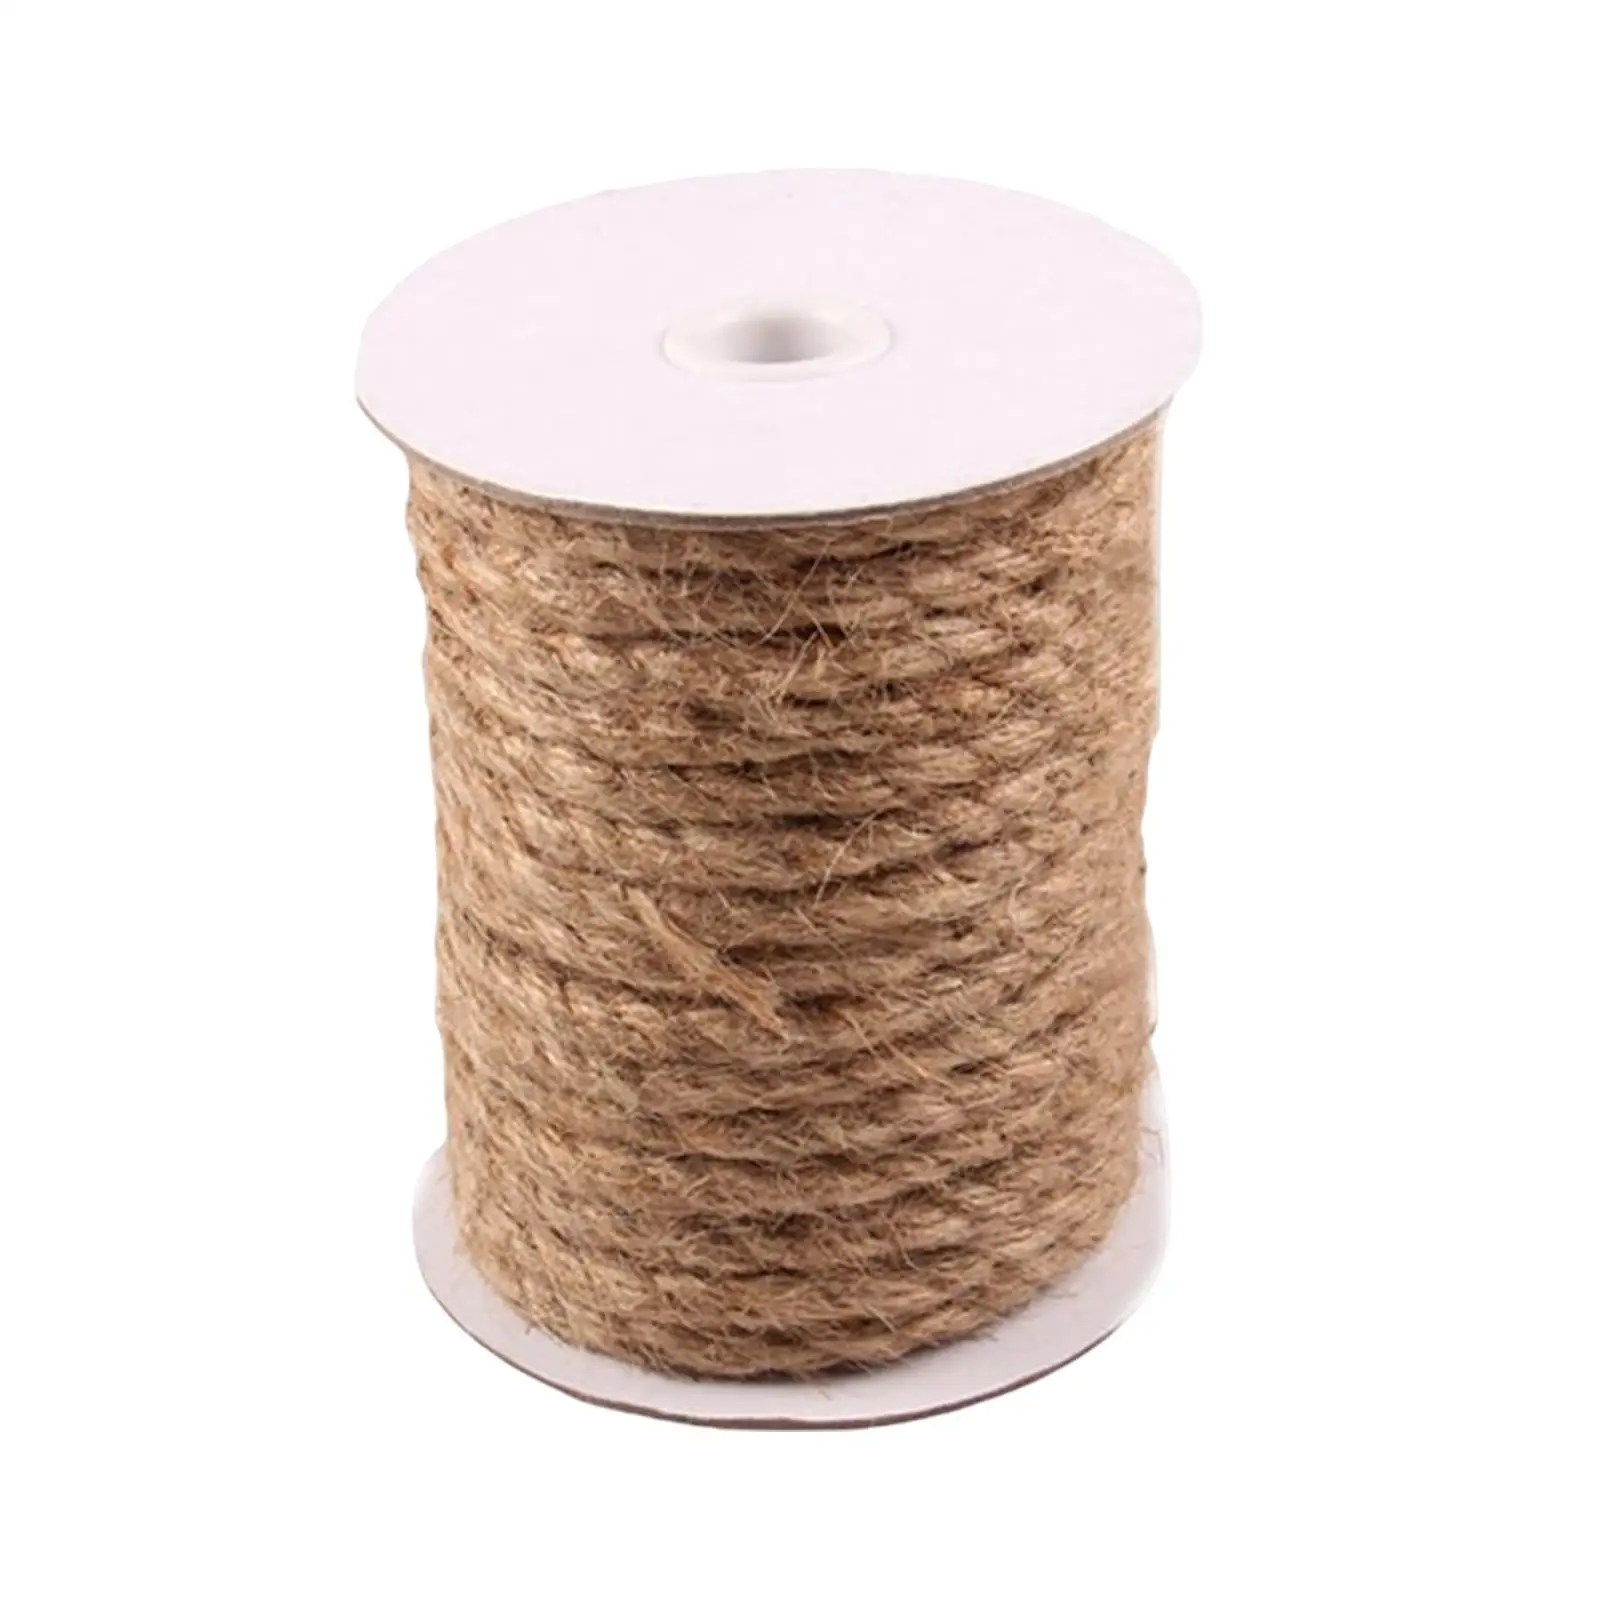 Hemp Rope Eco Friendly Weaving Rope Strong 15M for Macrame Pet Toys DIY Decoration Gift Wrapping Decorative Accents